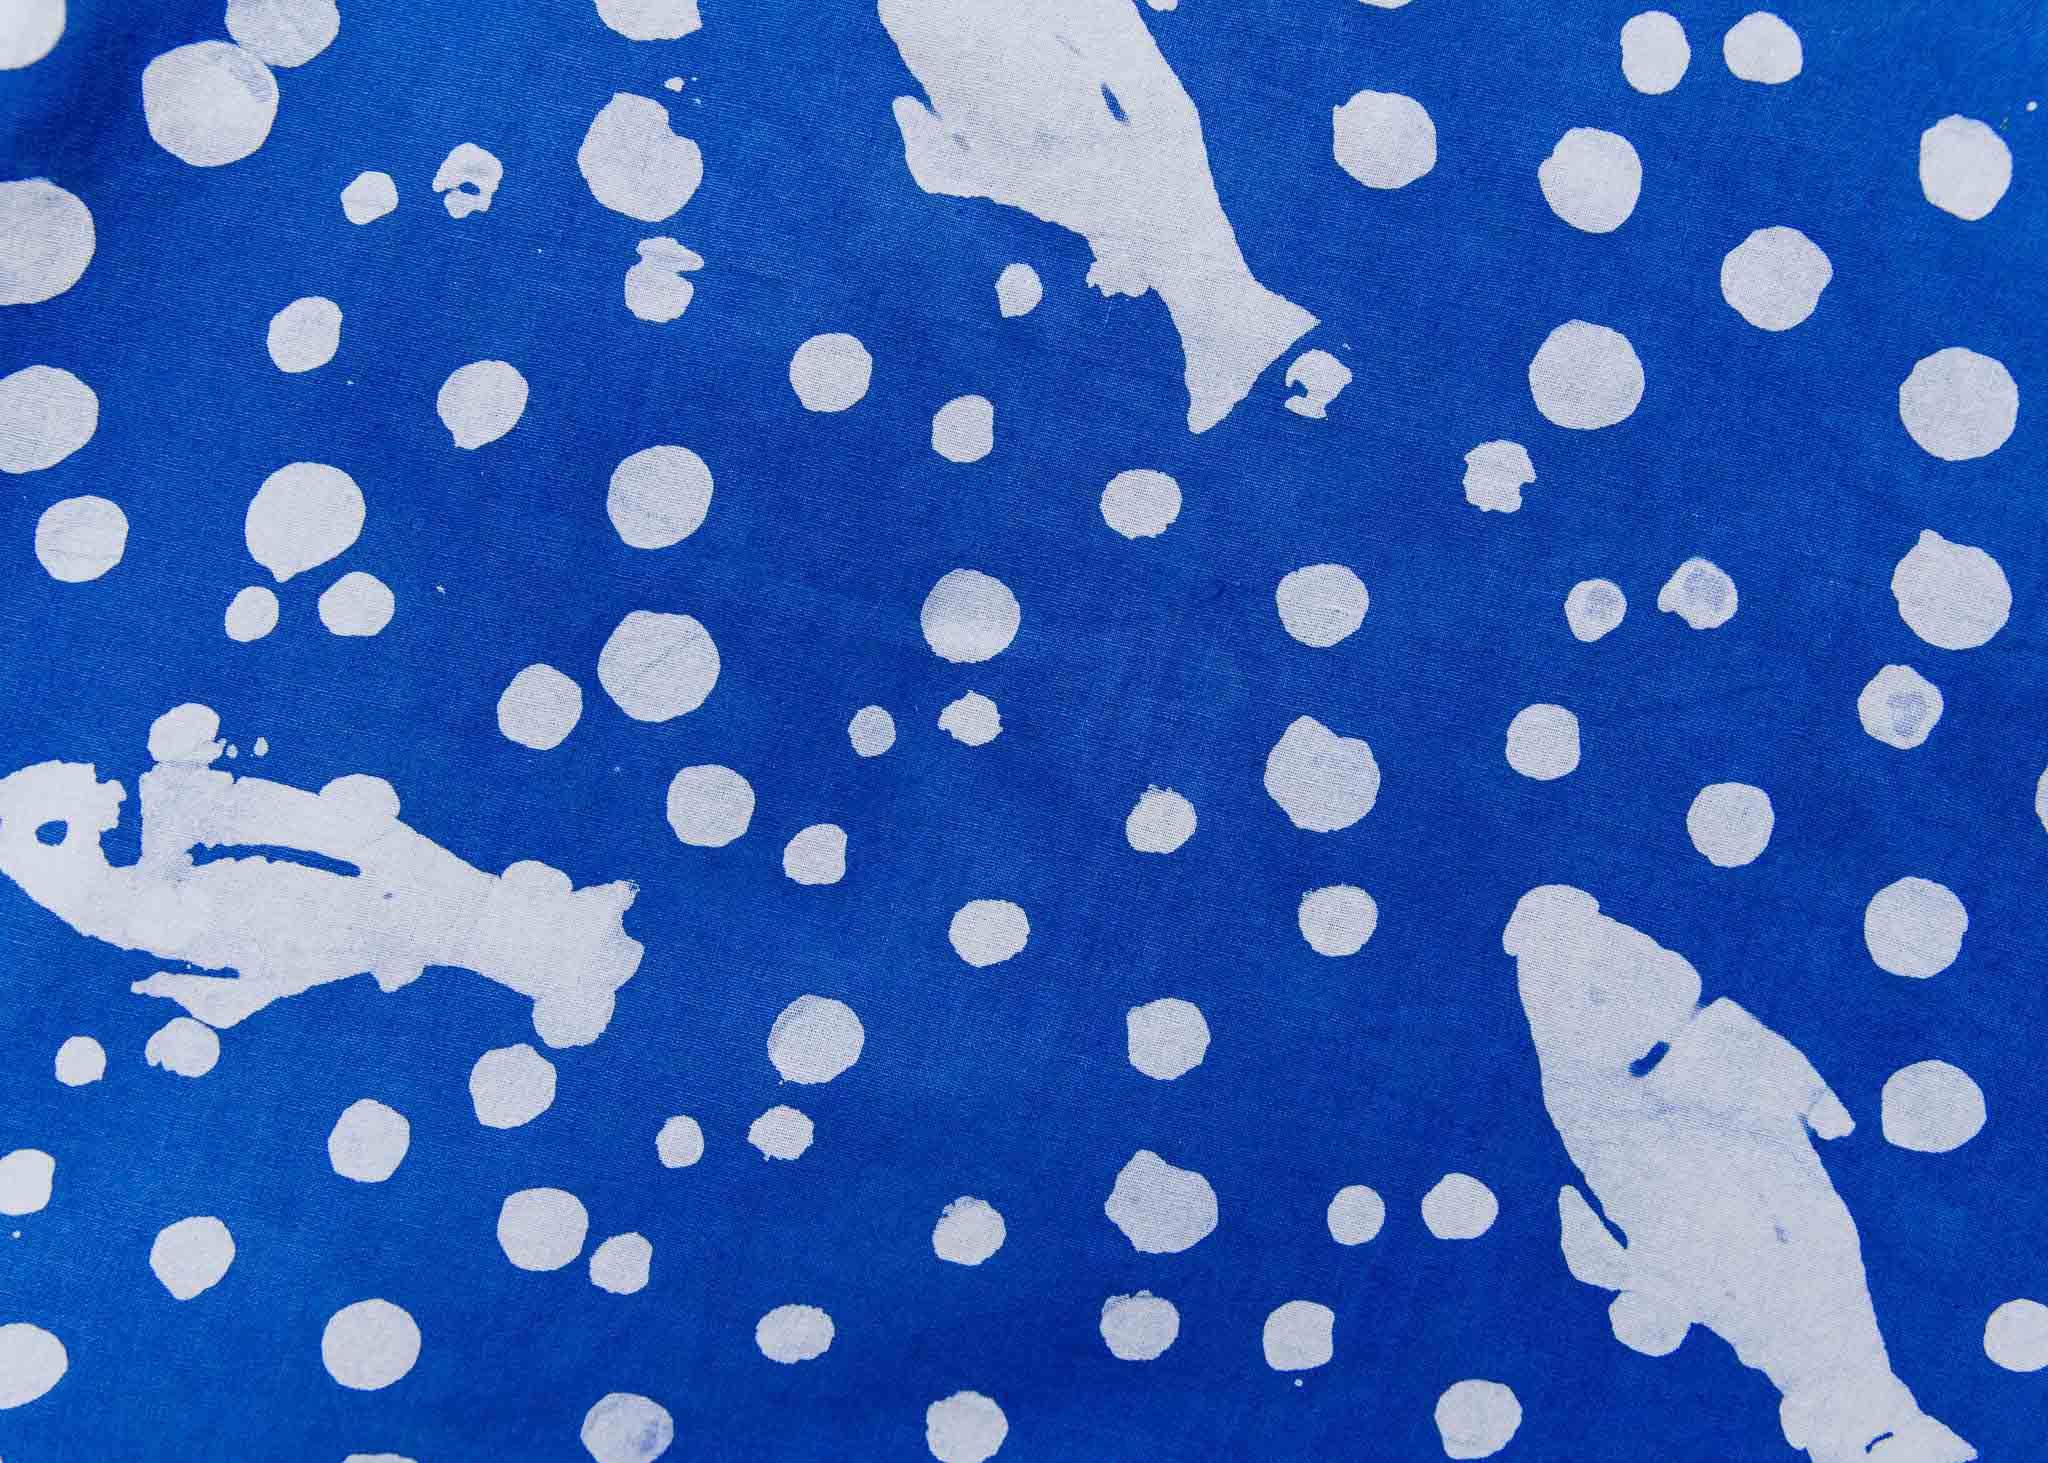 Display of blue dress with white fishes and polka dots.